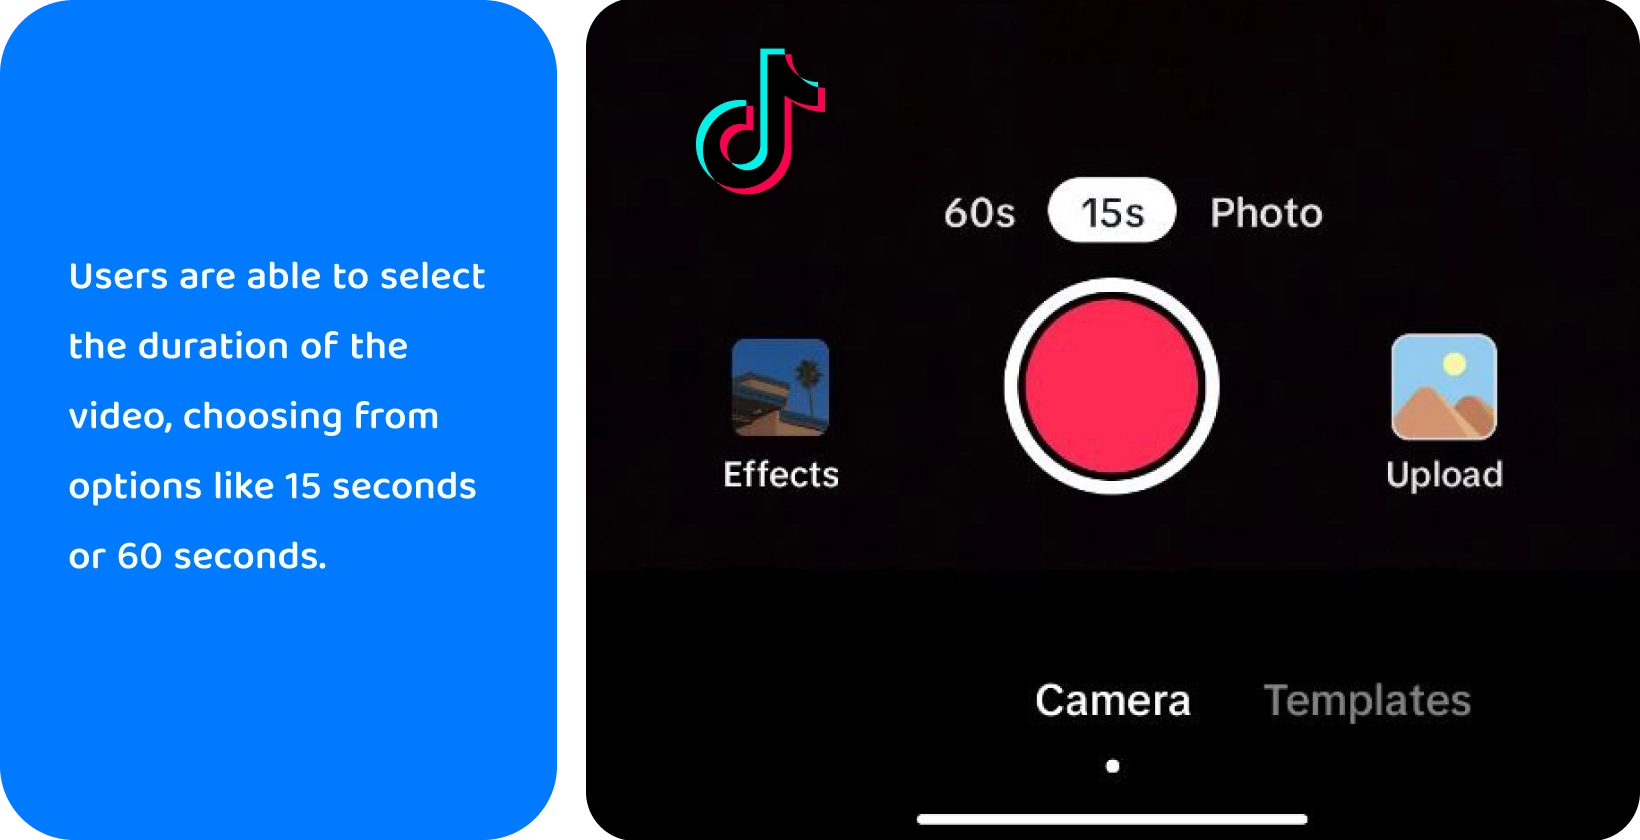 TikTok's recording interface with options to add sound, flip camera, apply filters, use timer, and more for creative video making.
